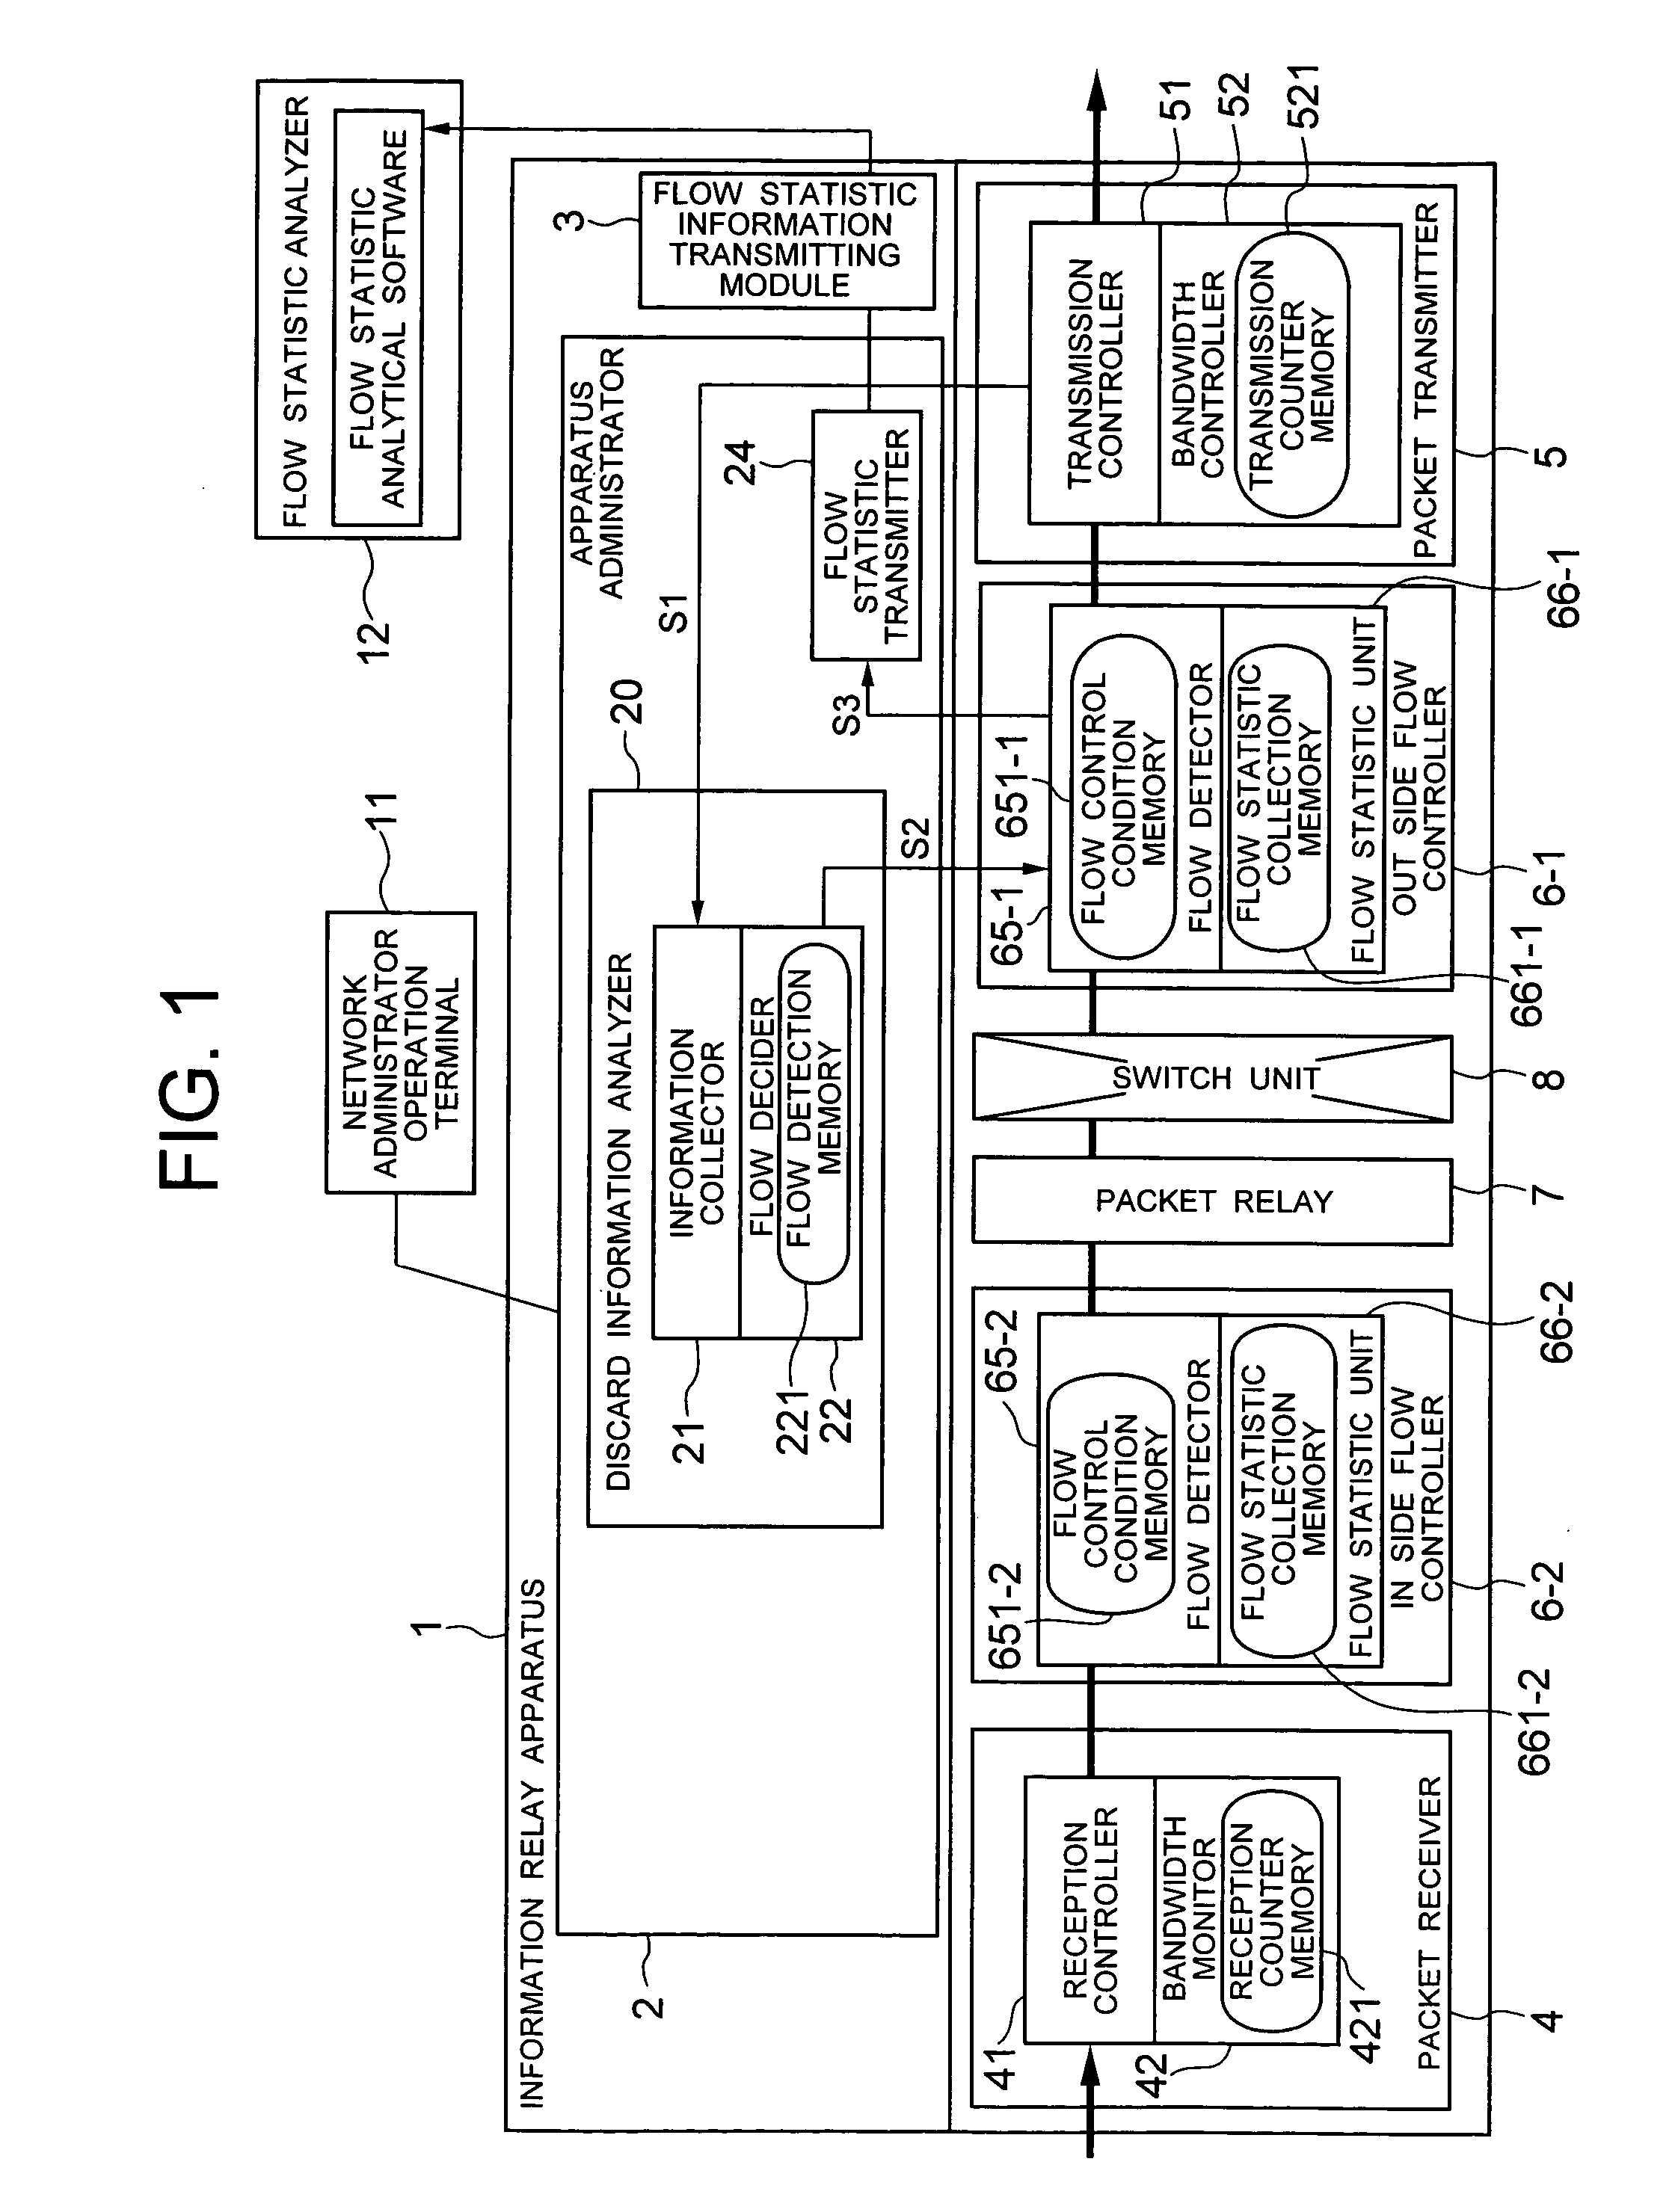 Information relay apparatus and method for collecting flow statistic information